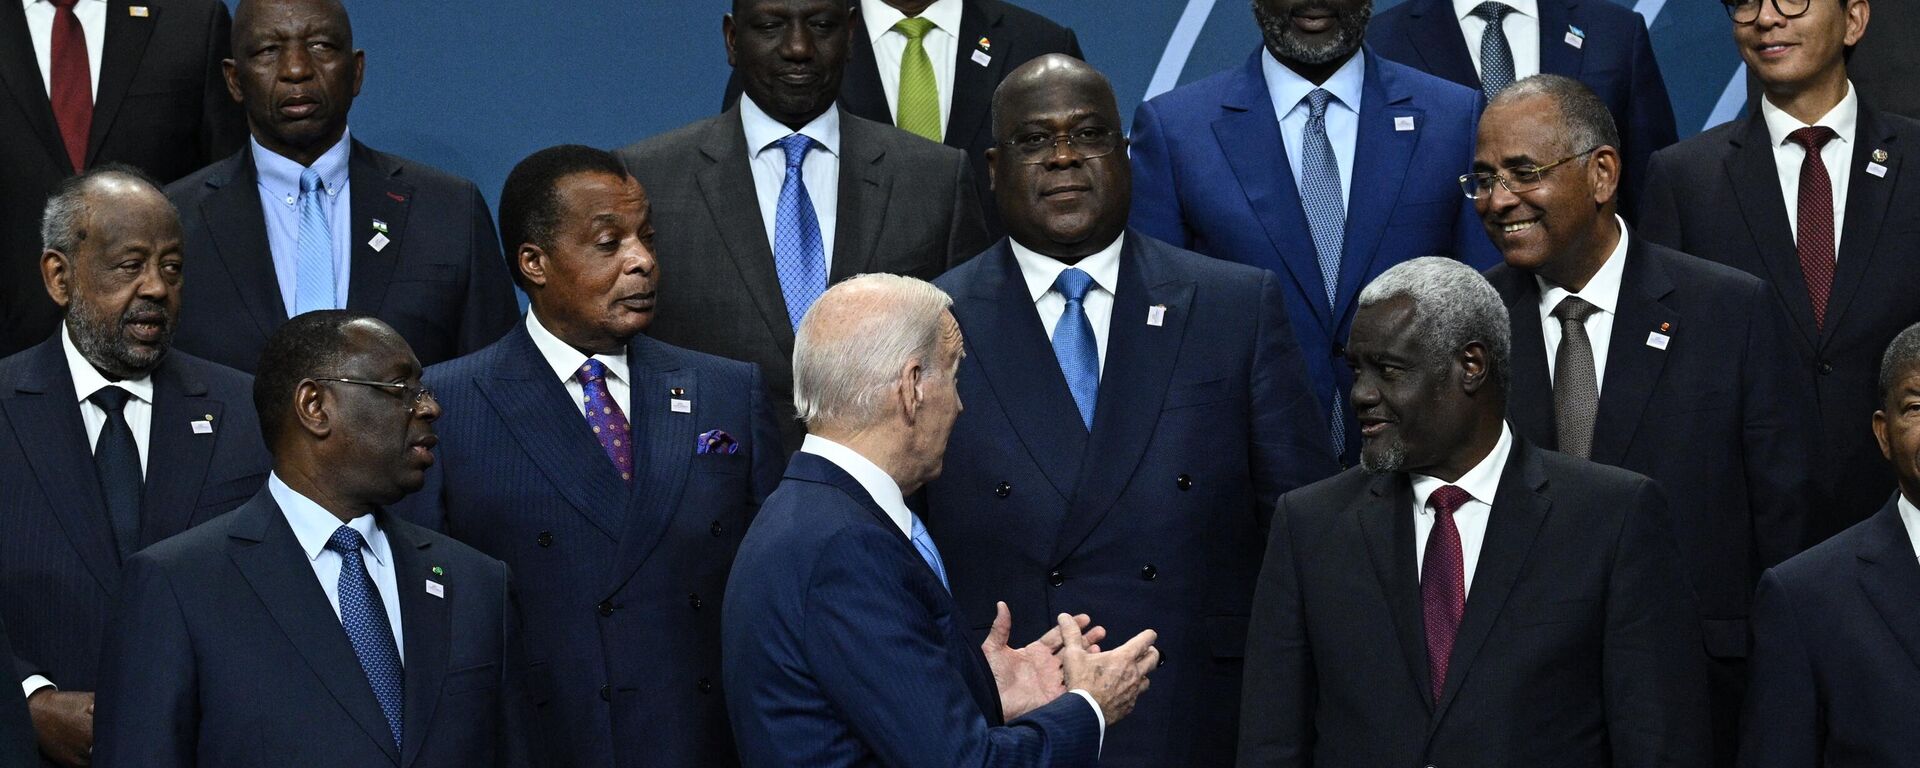 US President Joe Biden (C) participates in a family photo with the leaders of the US-Africa Leaders Summit at the Walter E. Washington Convention Center in Washington, DC, on December 15, 2022. - Sputnik International, 1920, 22.12.2022